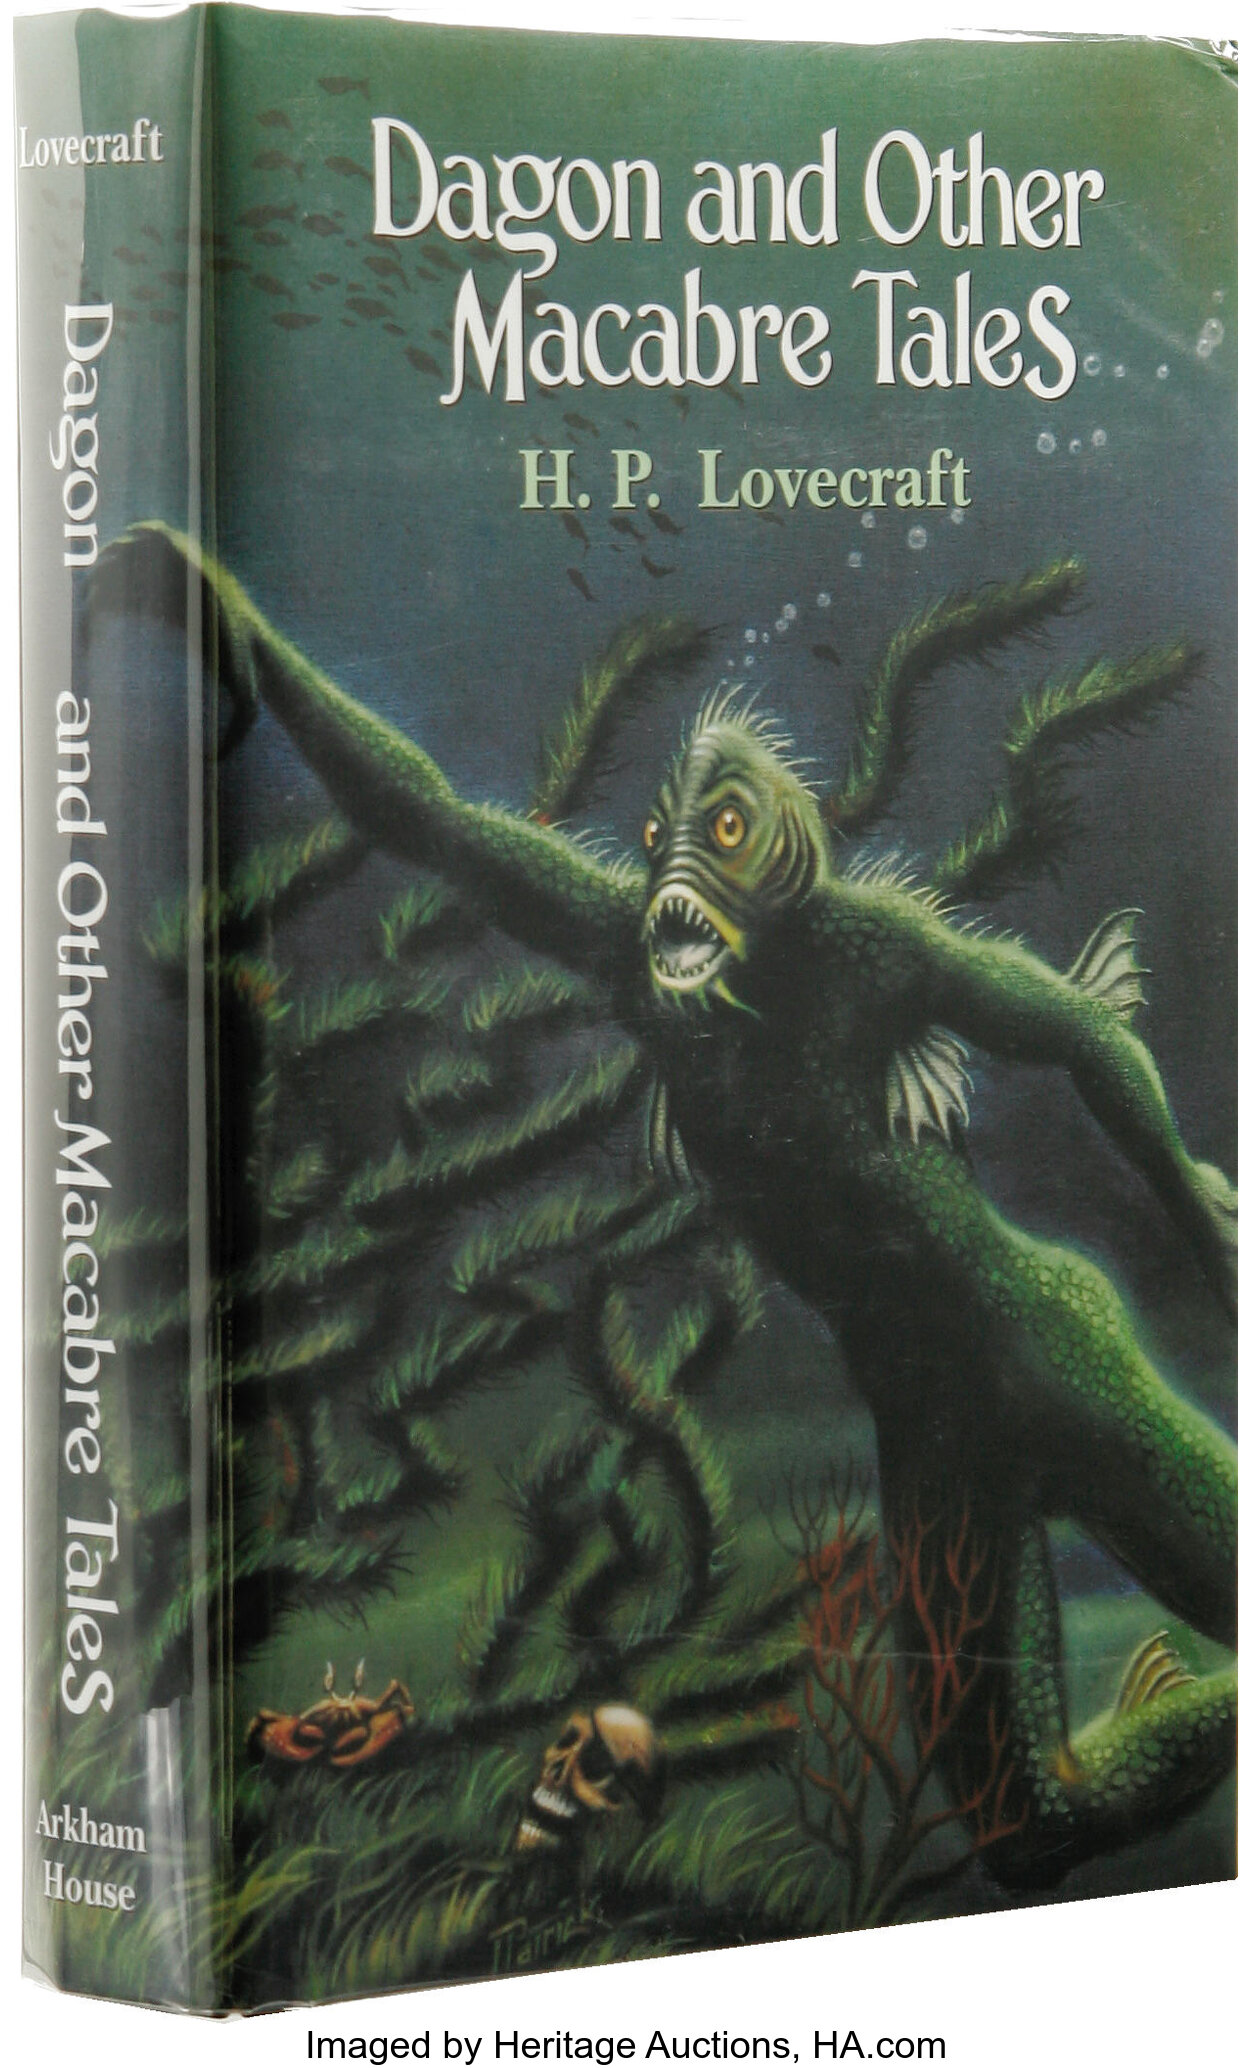 H. P. Lovecraft: Dagon and Other Macabre Tales. Introduction by